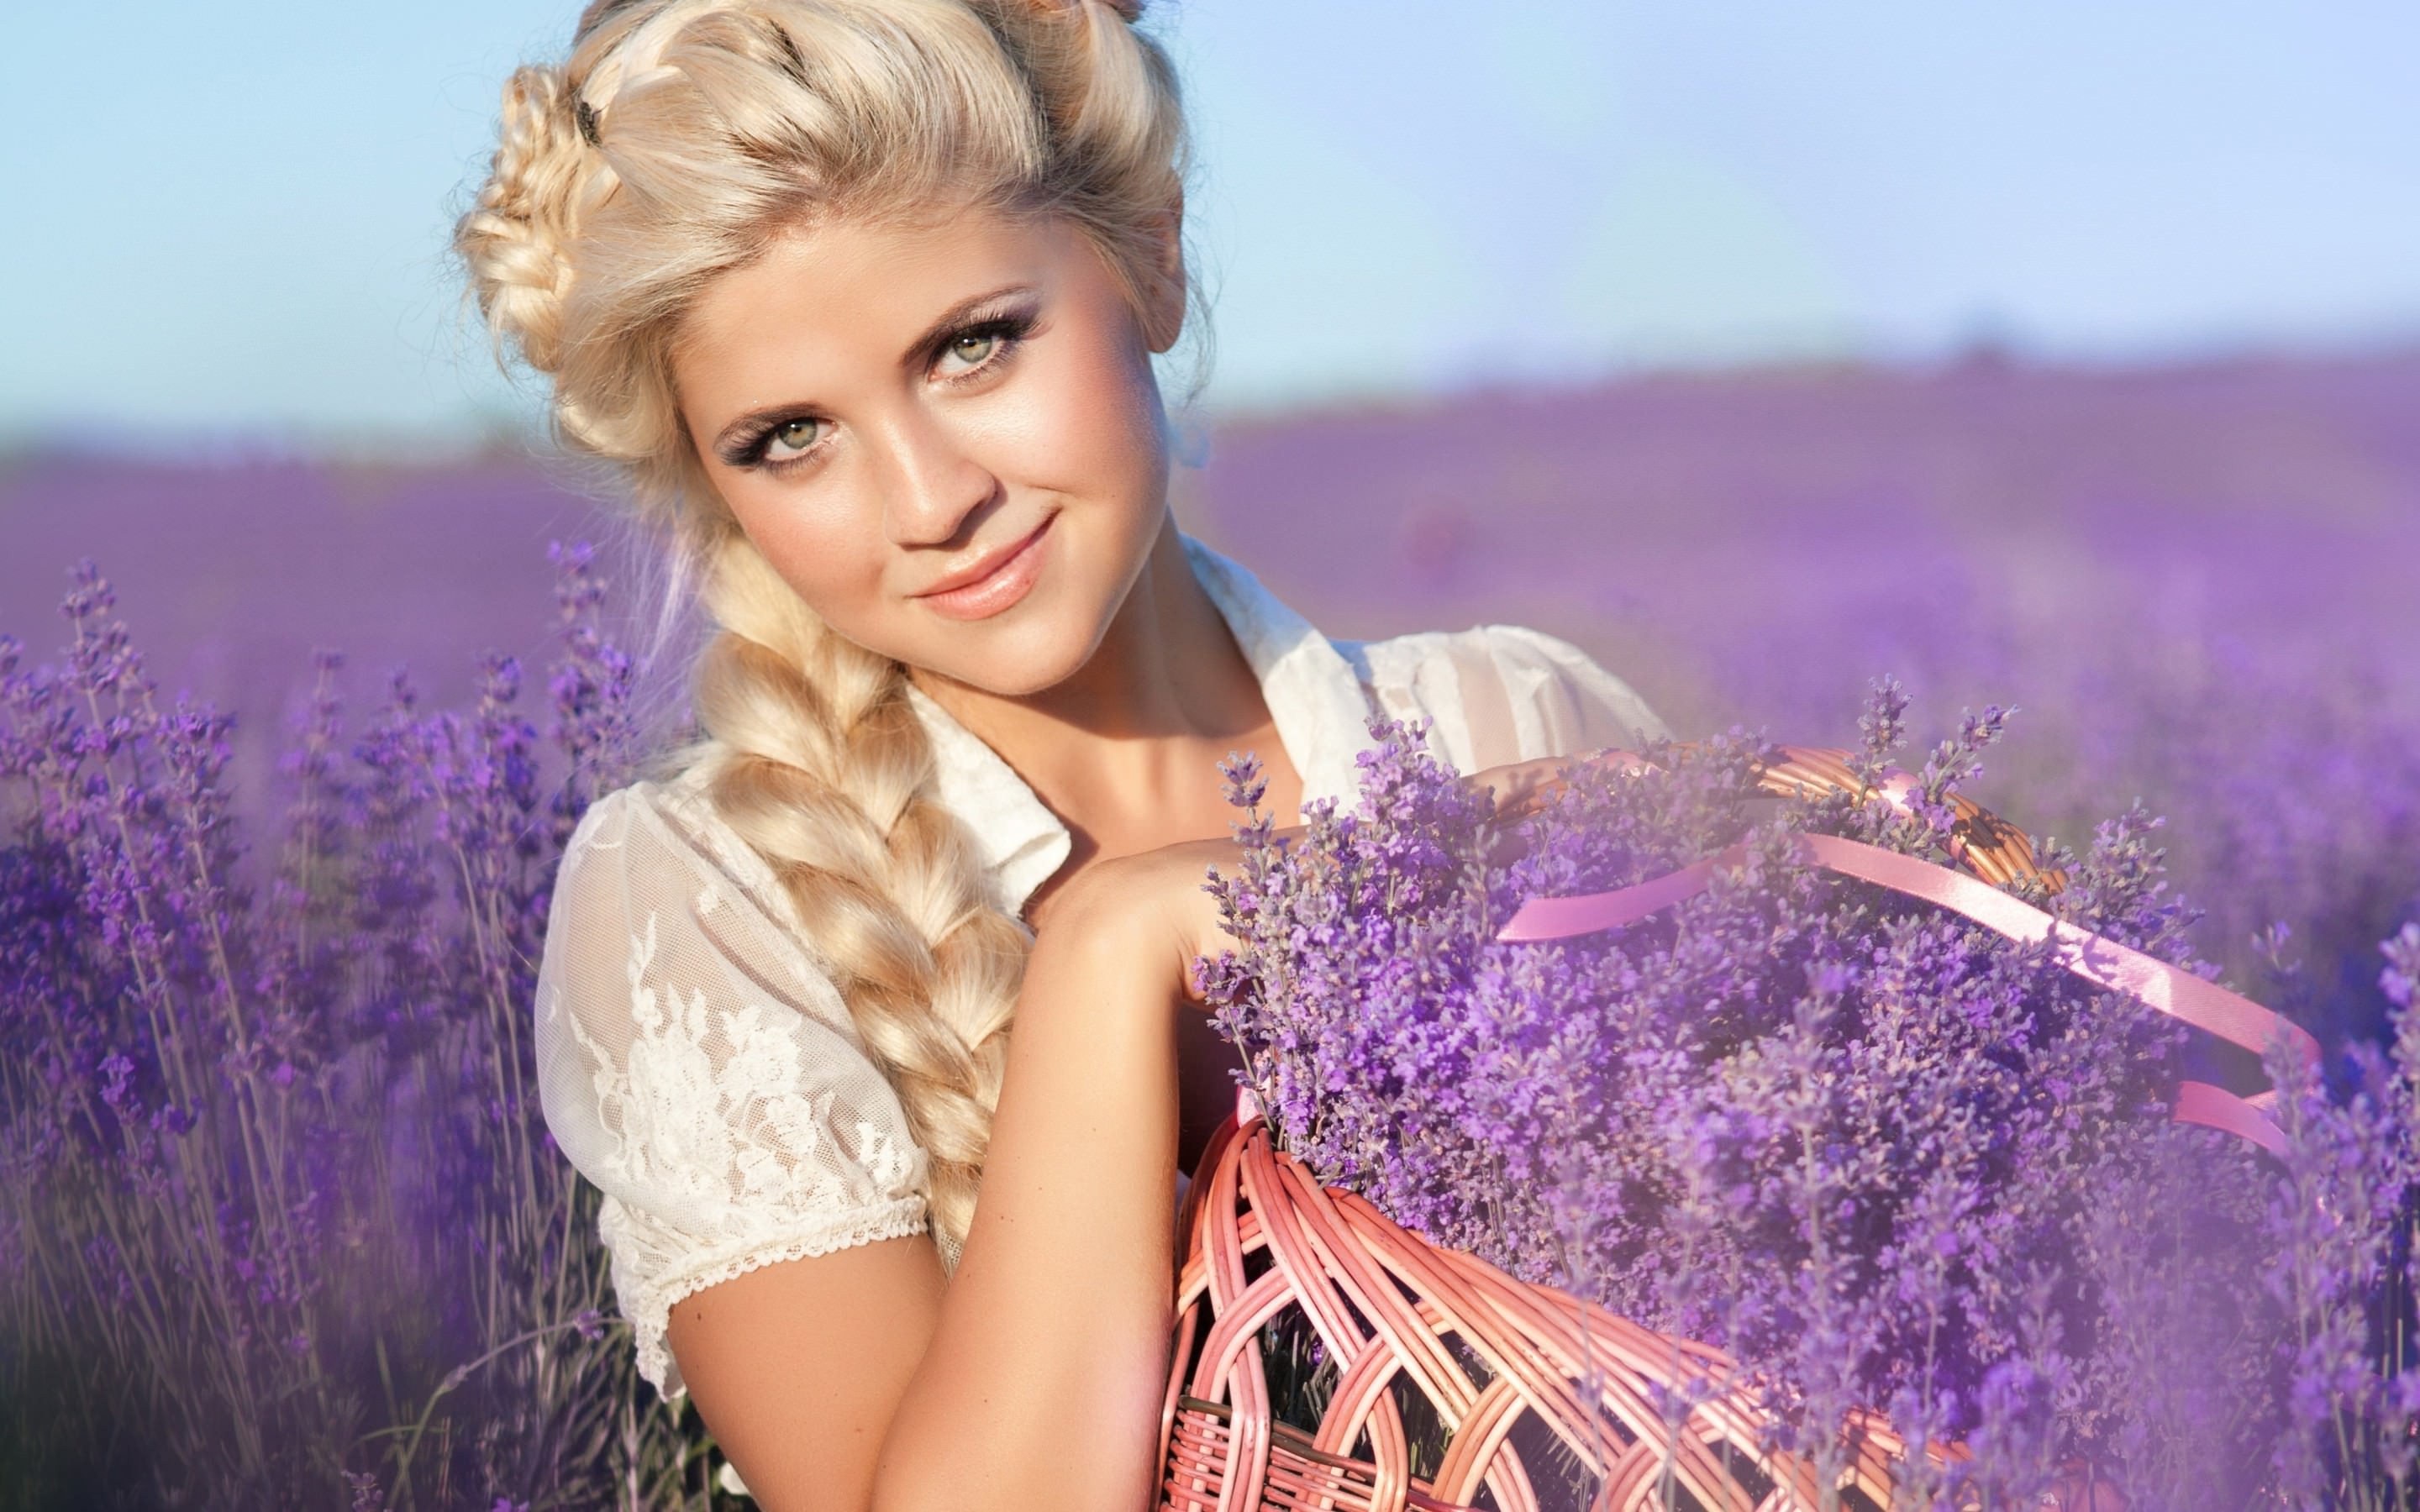 People 2880x1800 women face portrait blonde lavender sofia andreevna women outdoors makeup flowers plants looking at viewer field outdoors long hair baskets